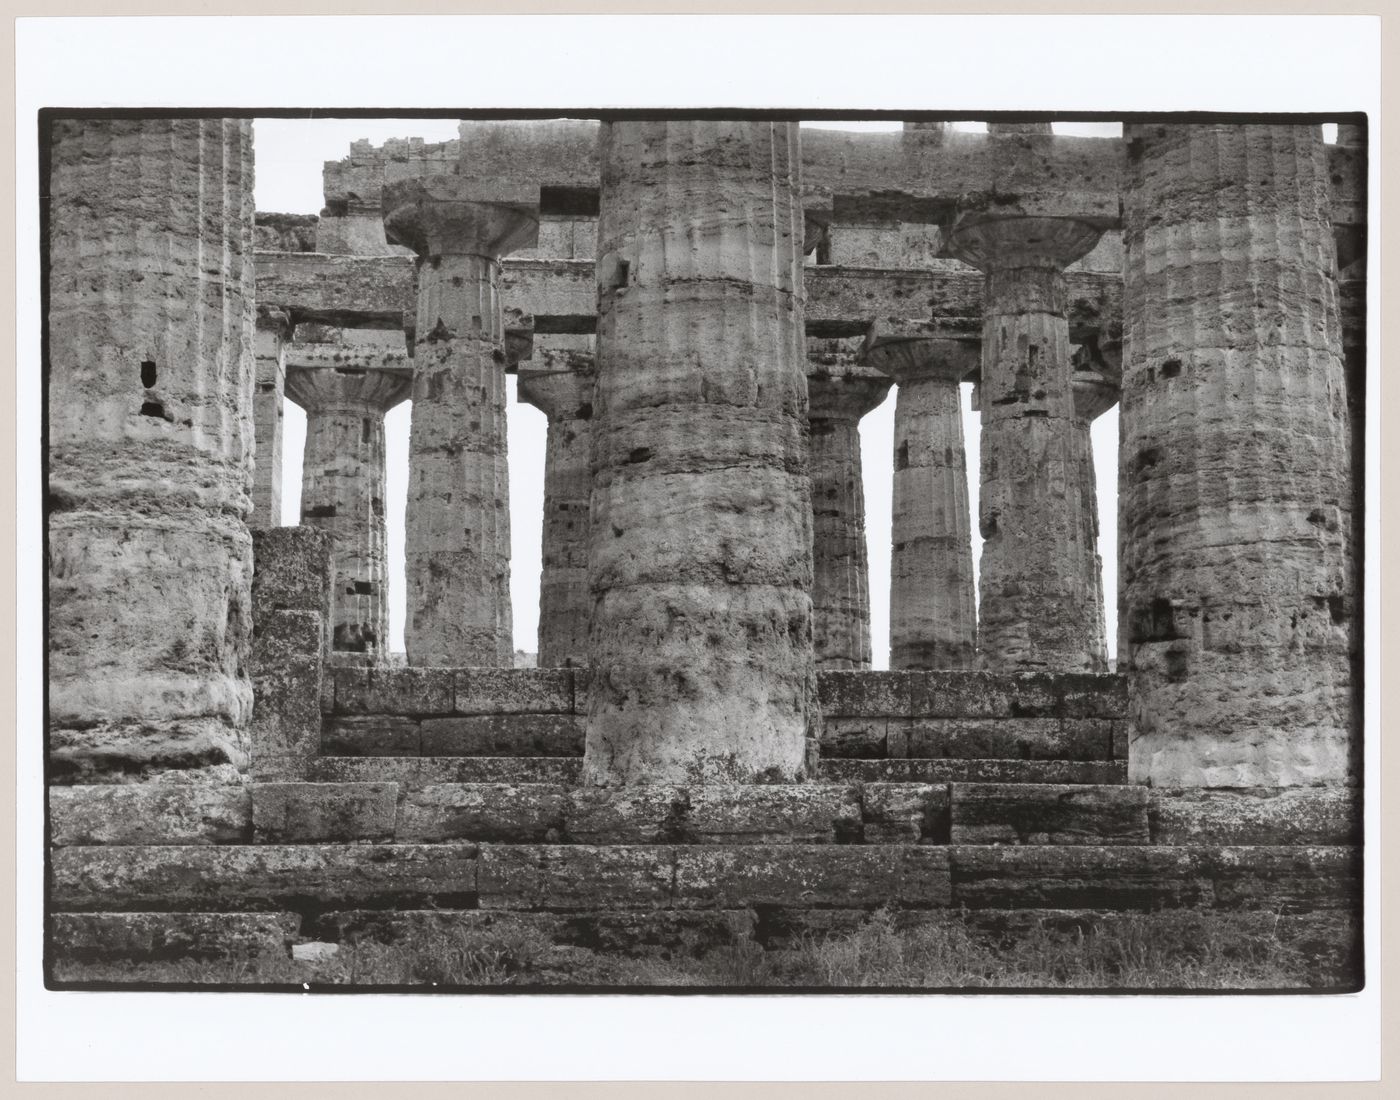 View of temple columns, Greece or Sicily, Italy